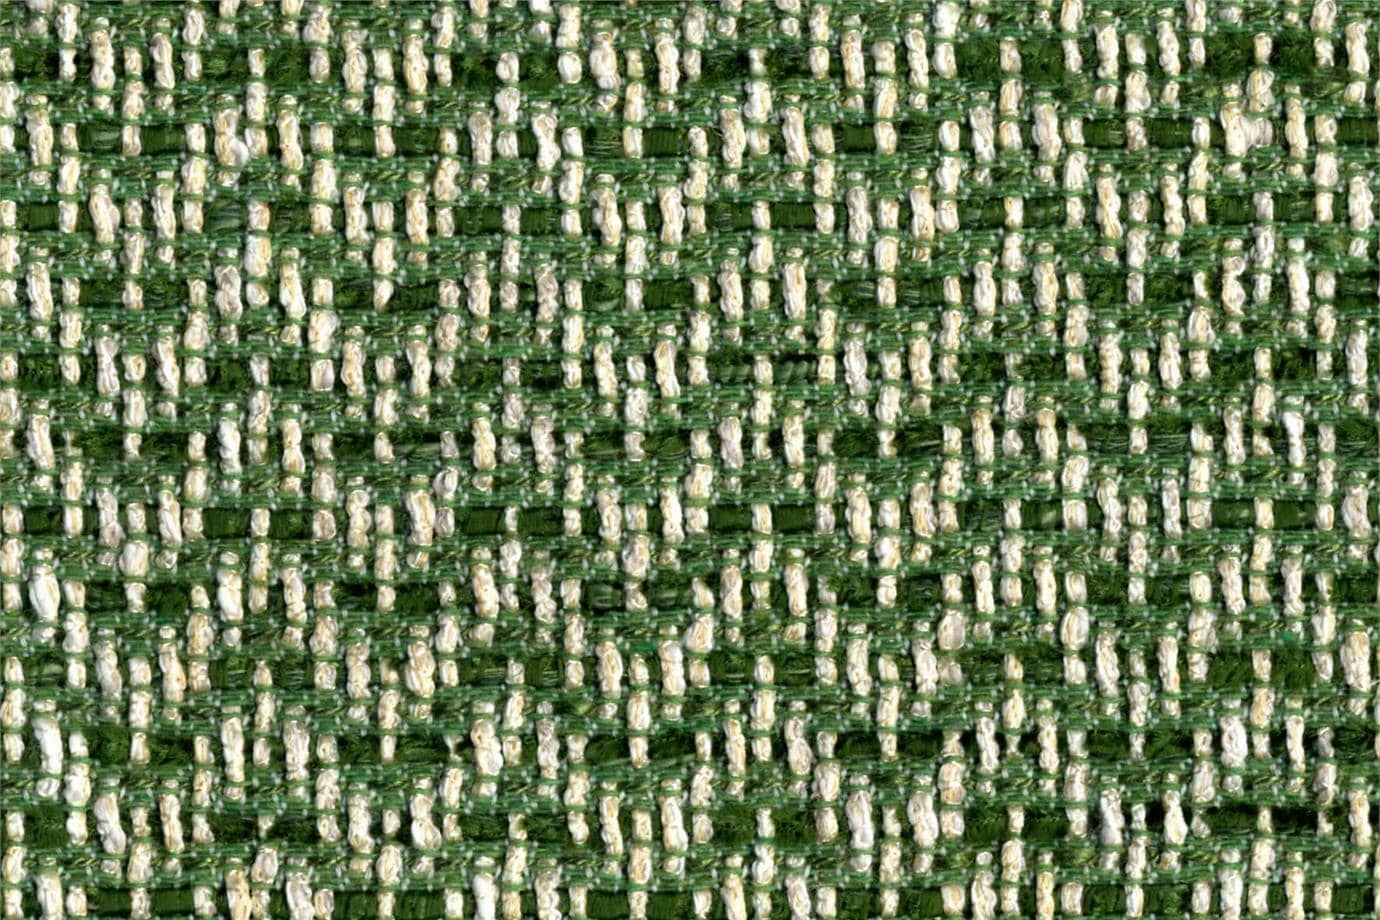 WOOD 003 Verde home decoration fabric